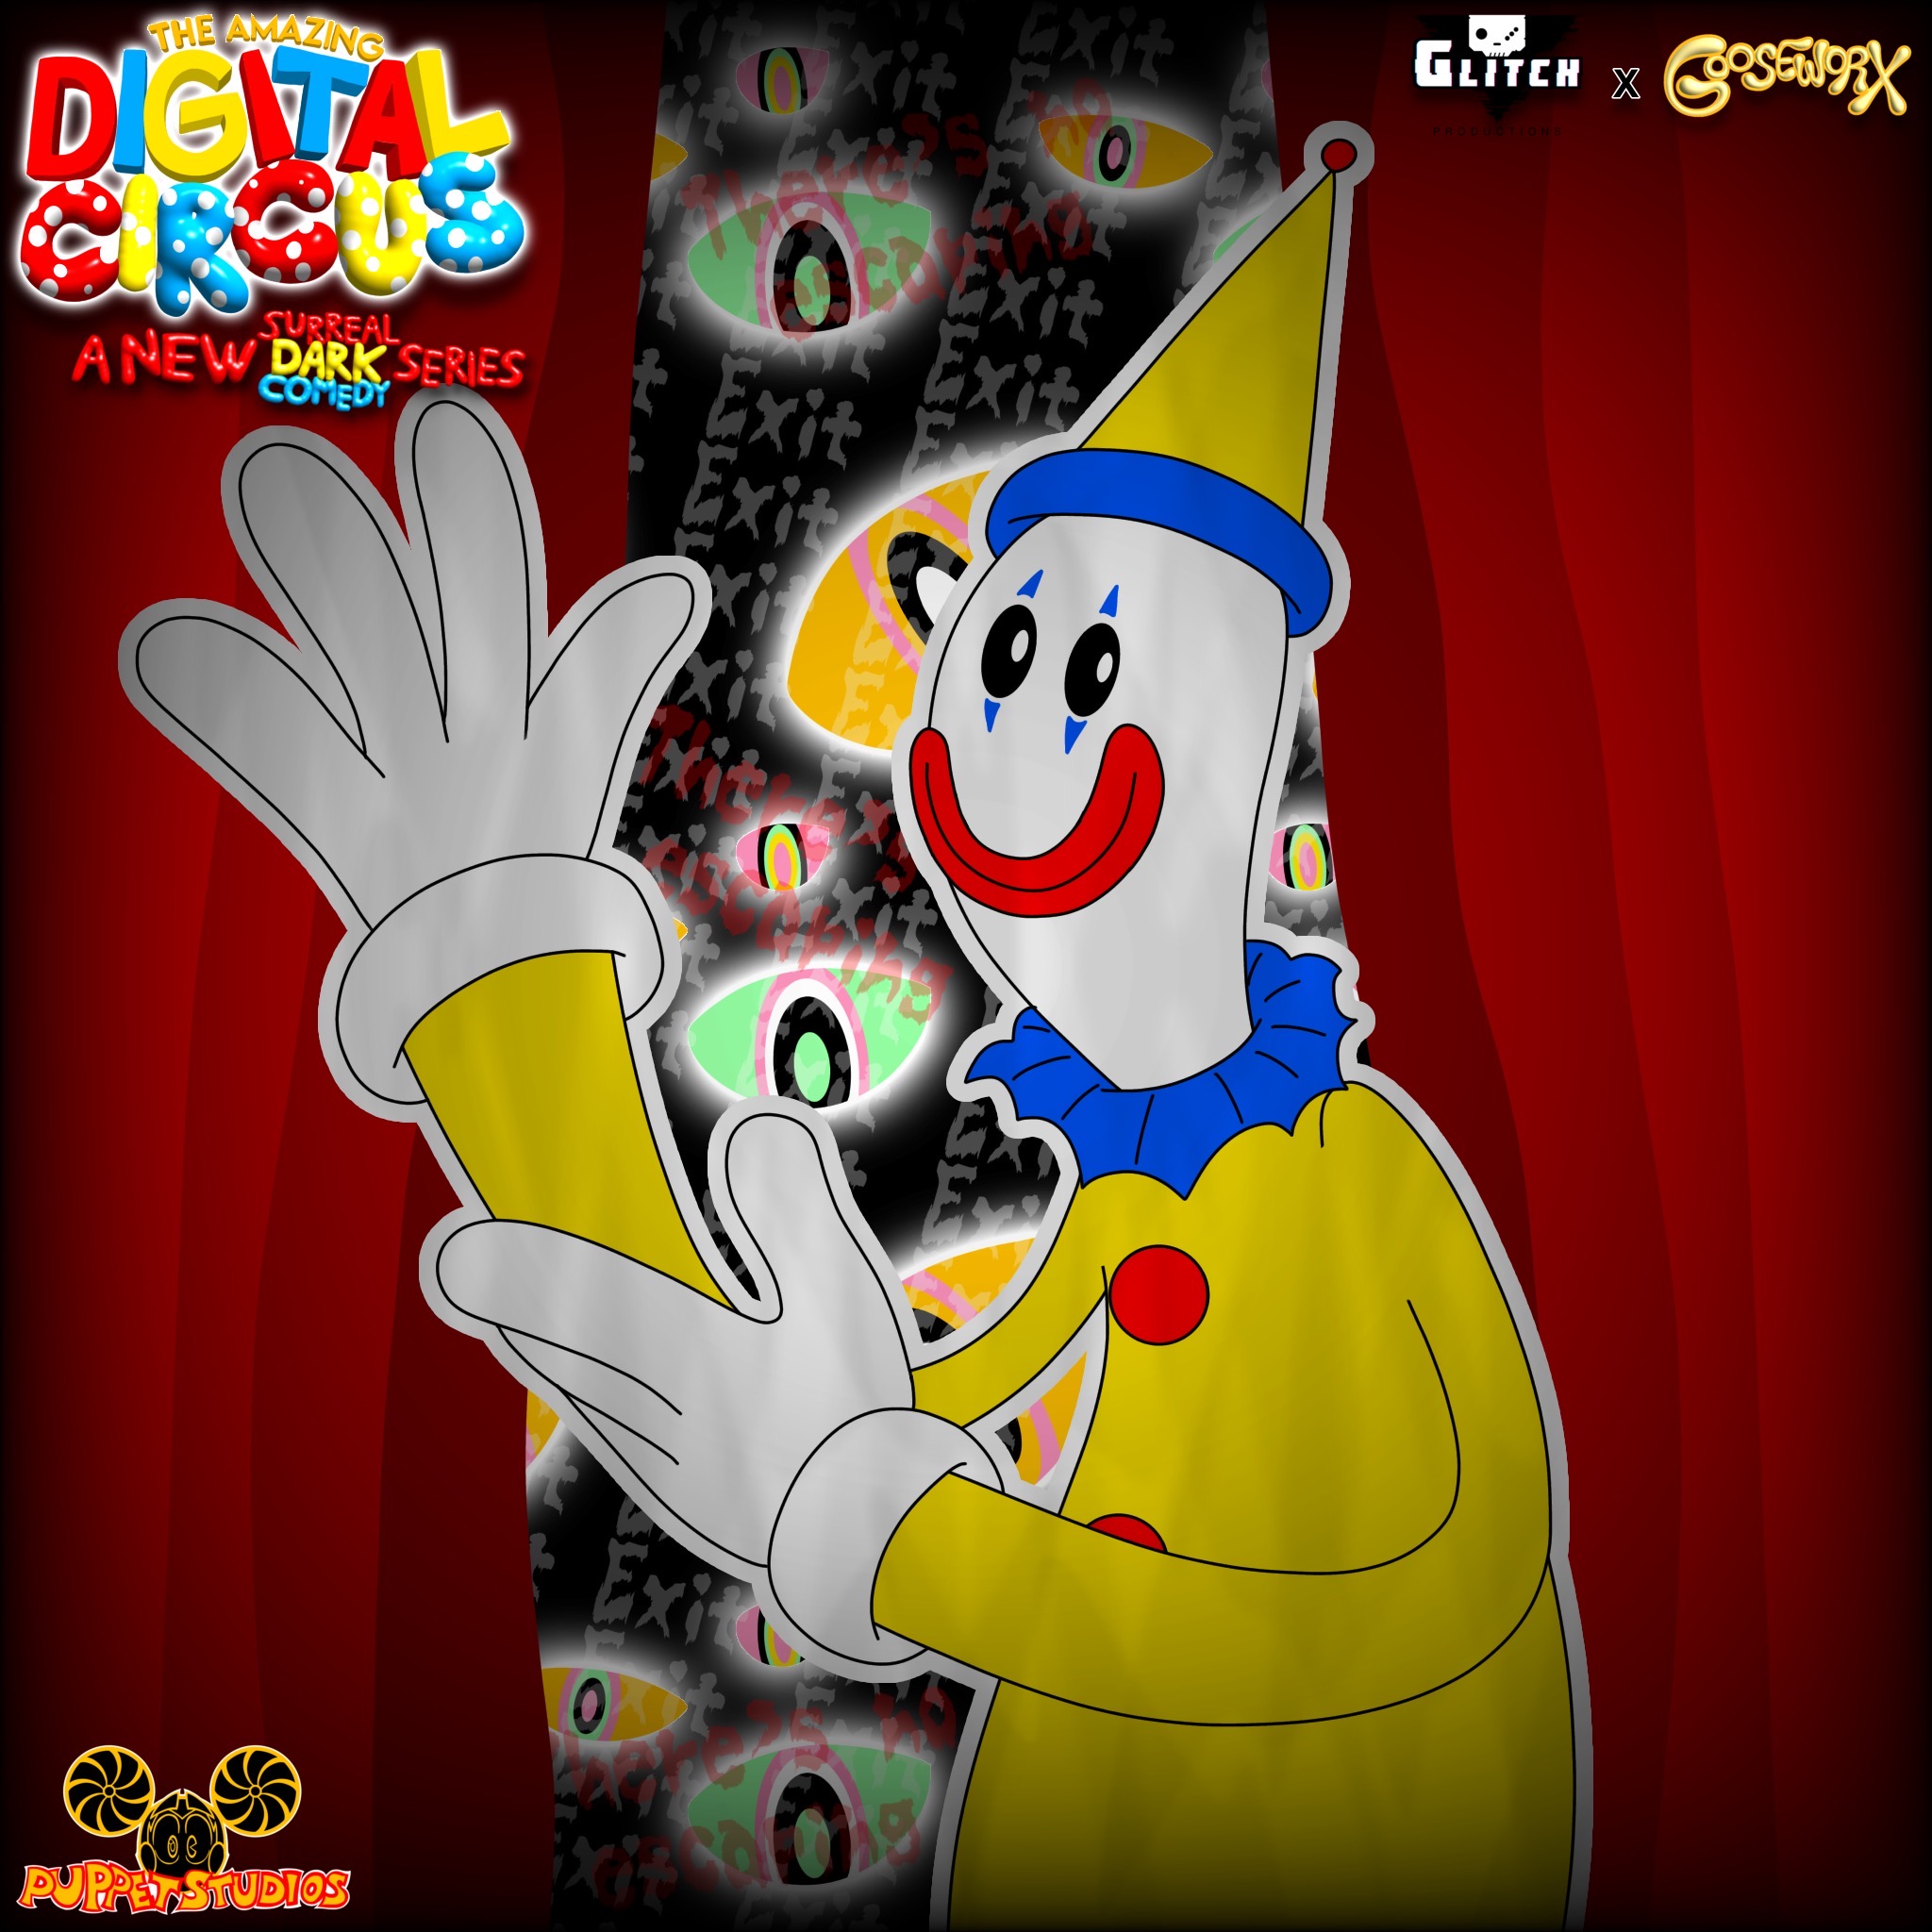 The Amazing Digital Circus Kaufmo The Clown By Cheesecakecreativity